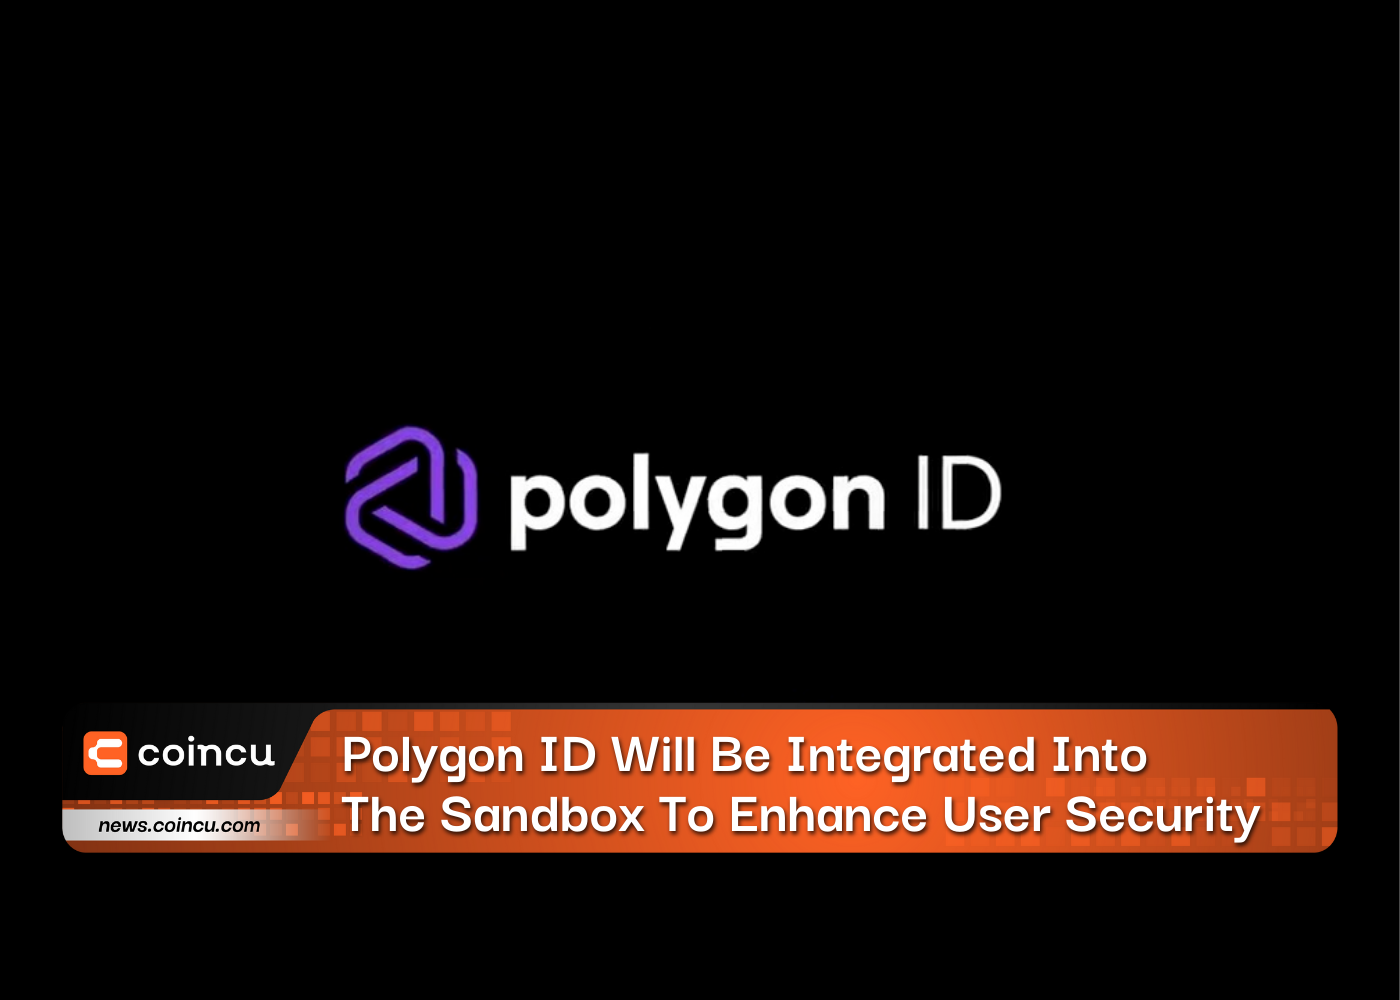 Polygon ID Will Be Integrated Into The Sandbox To Enhance User Security